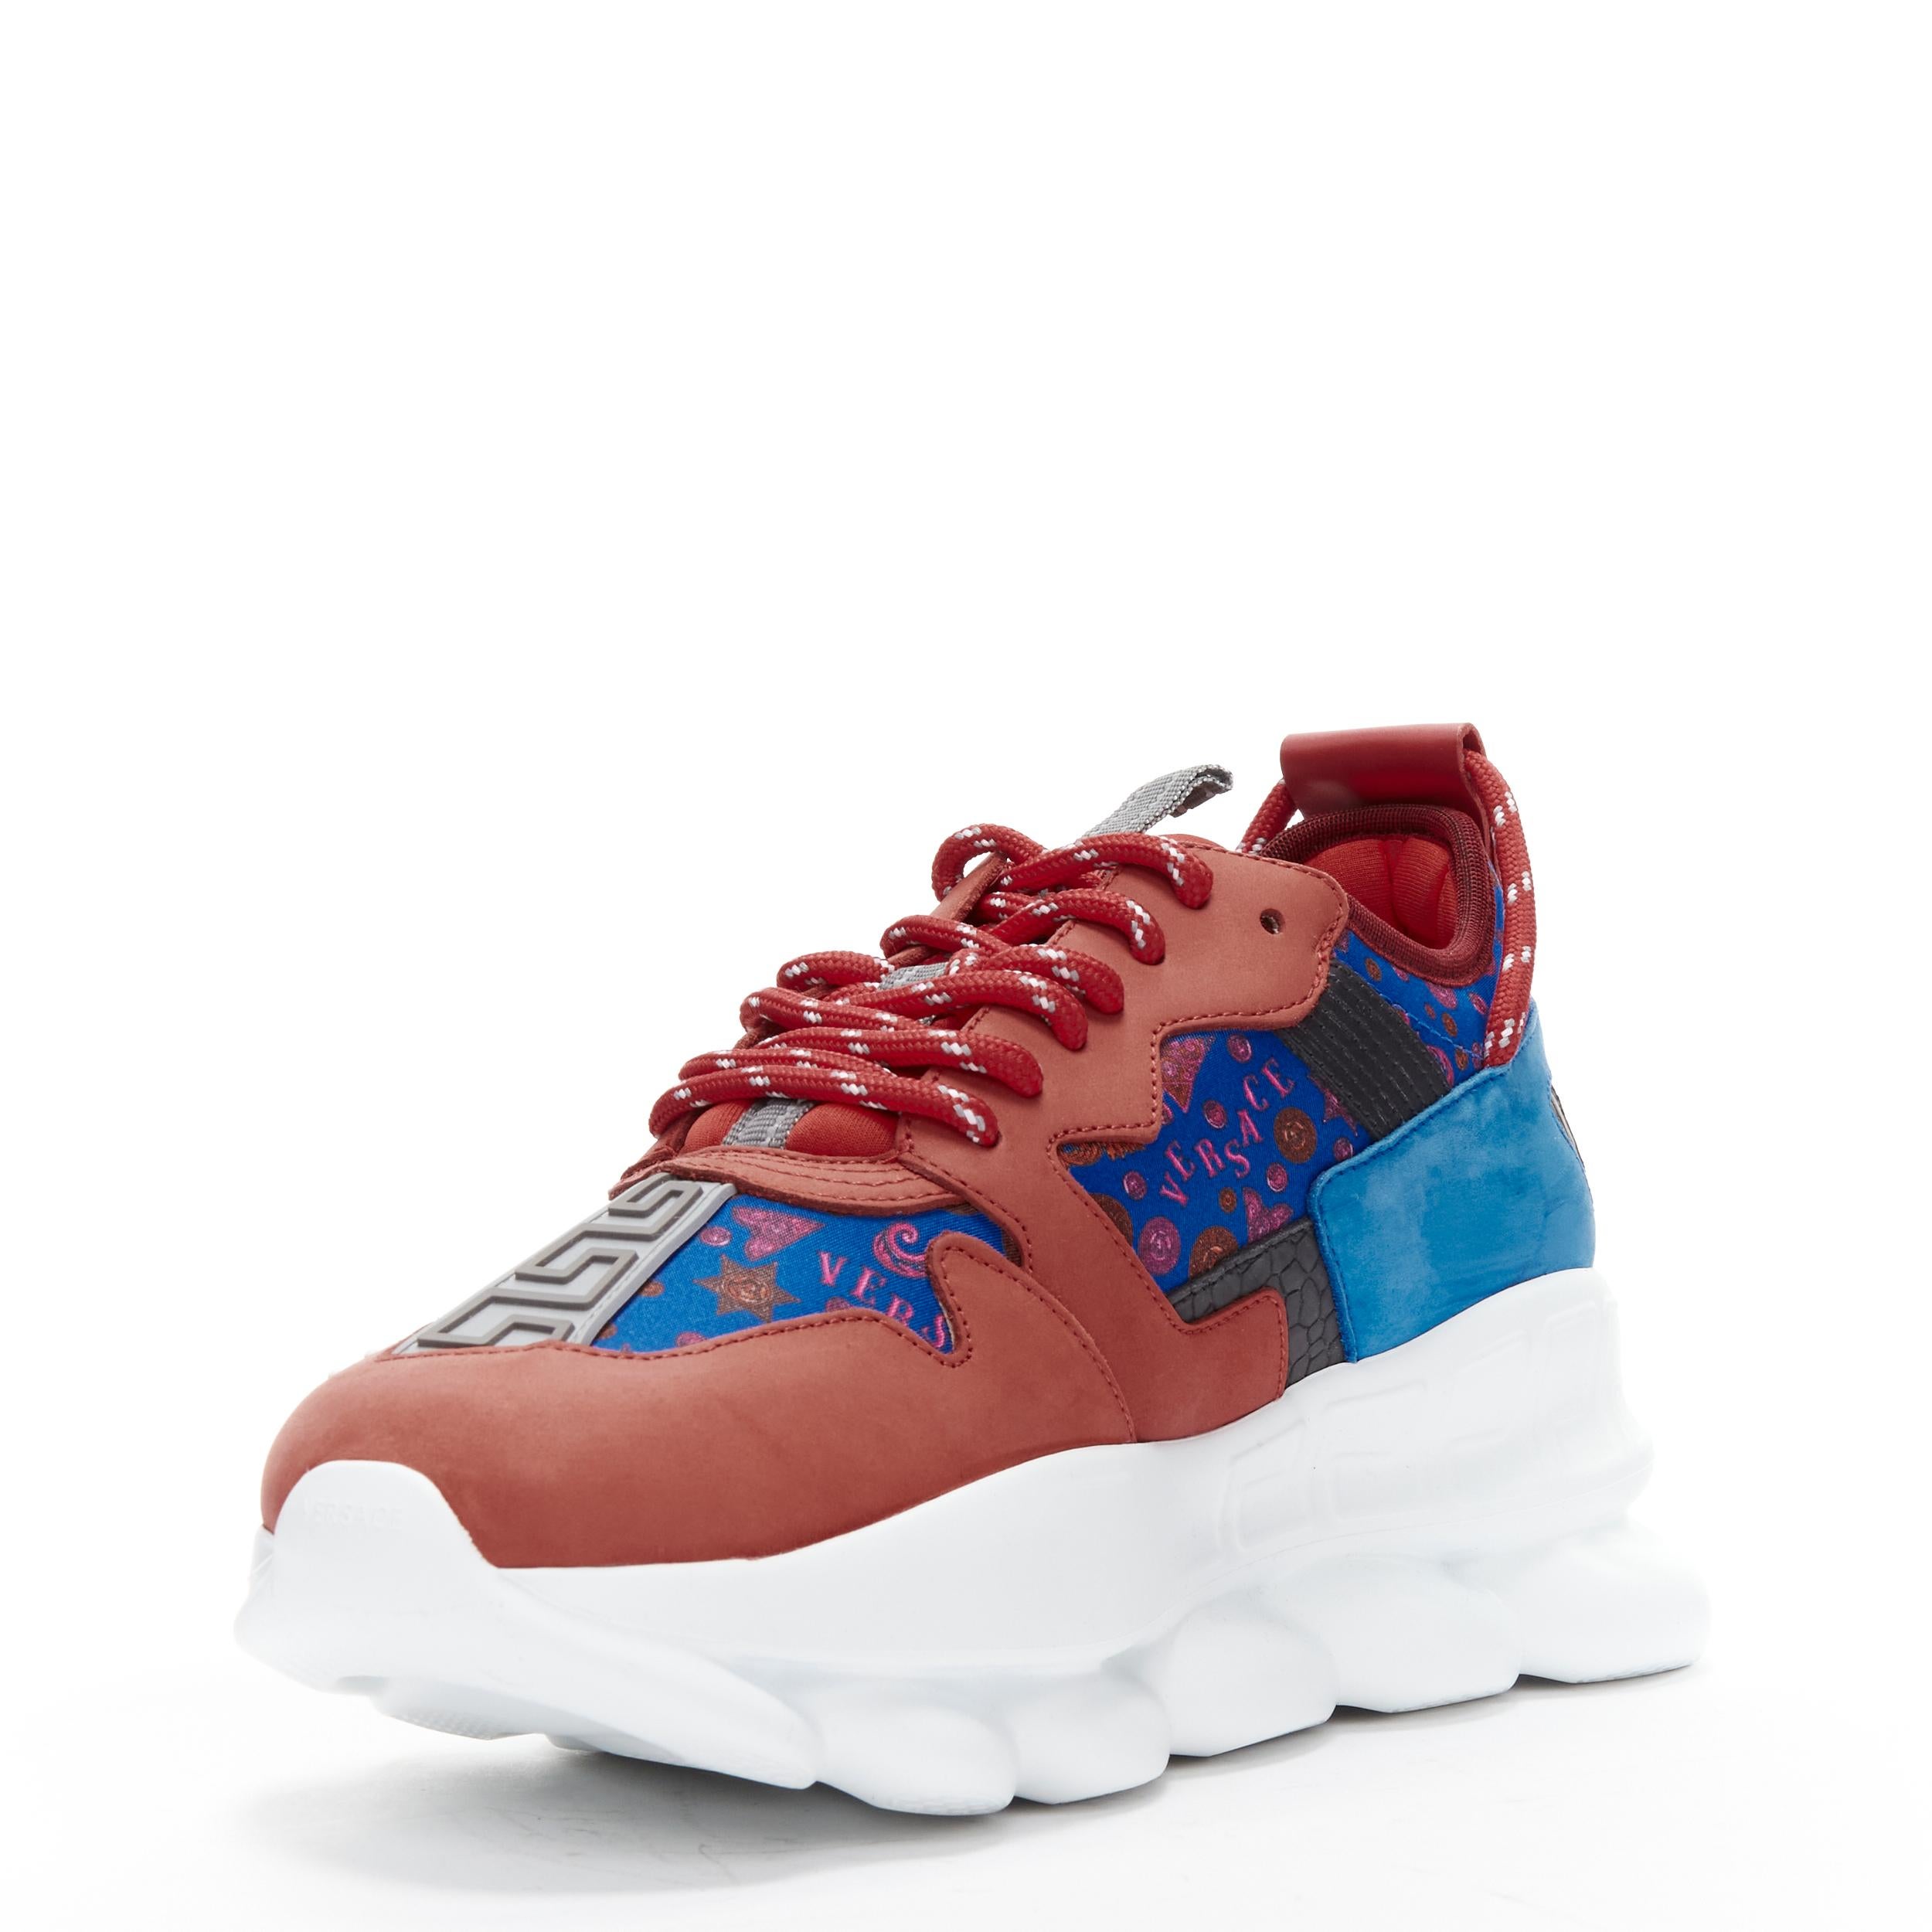 versace chain reaction red white and blue